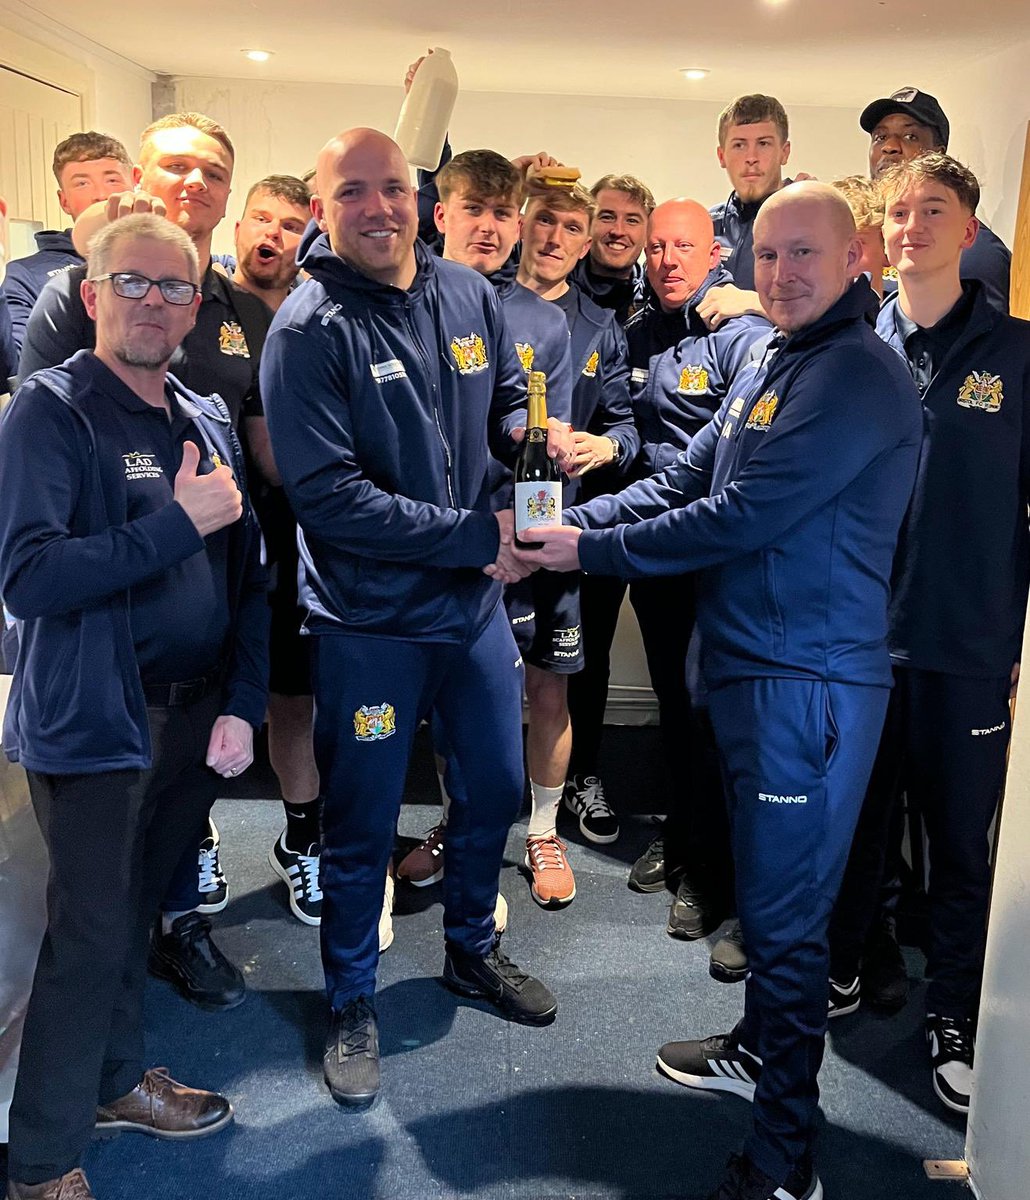 Todays Man of the Match: Our squad🏆…. We simply couldn’t choose between them. They put in an outstanding effort tonight under the lights. Well done lads - The Management Team